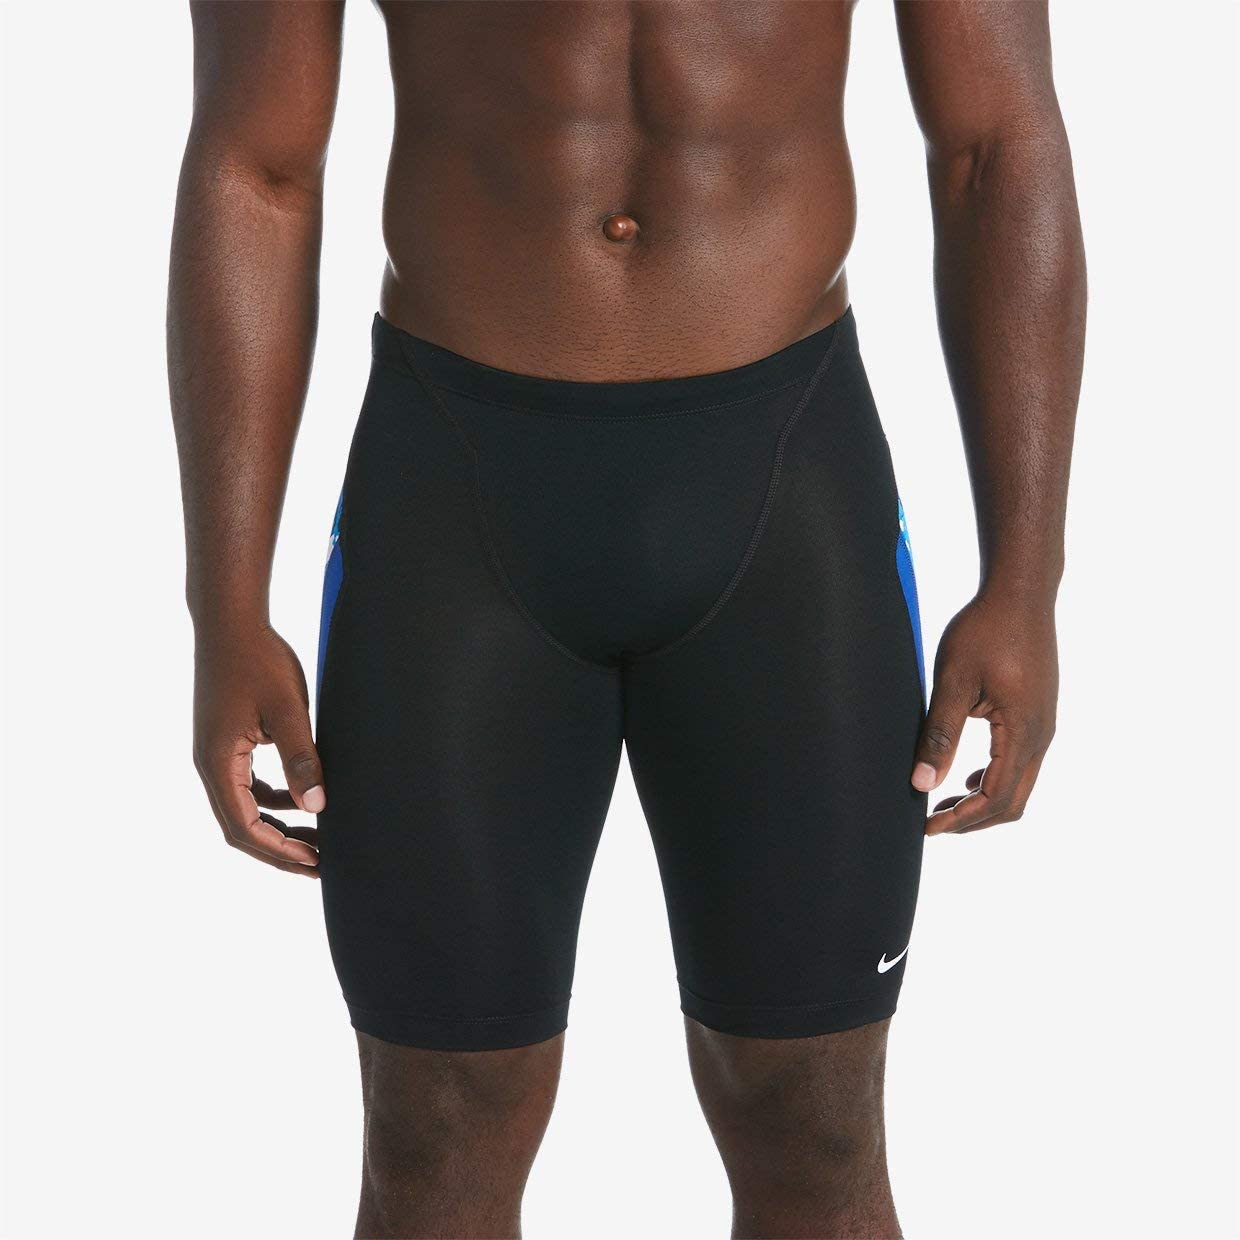 Nike Swim Men's Jammer in Game Royal color from the front